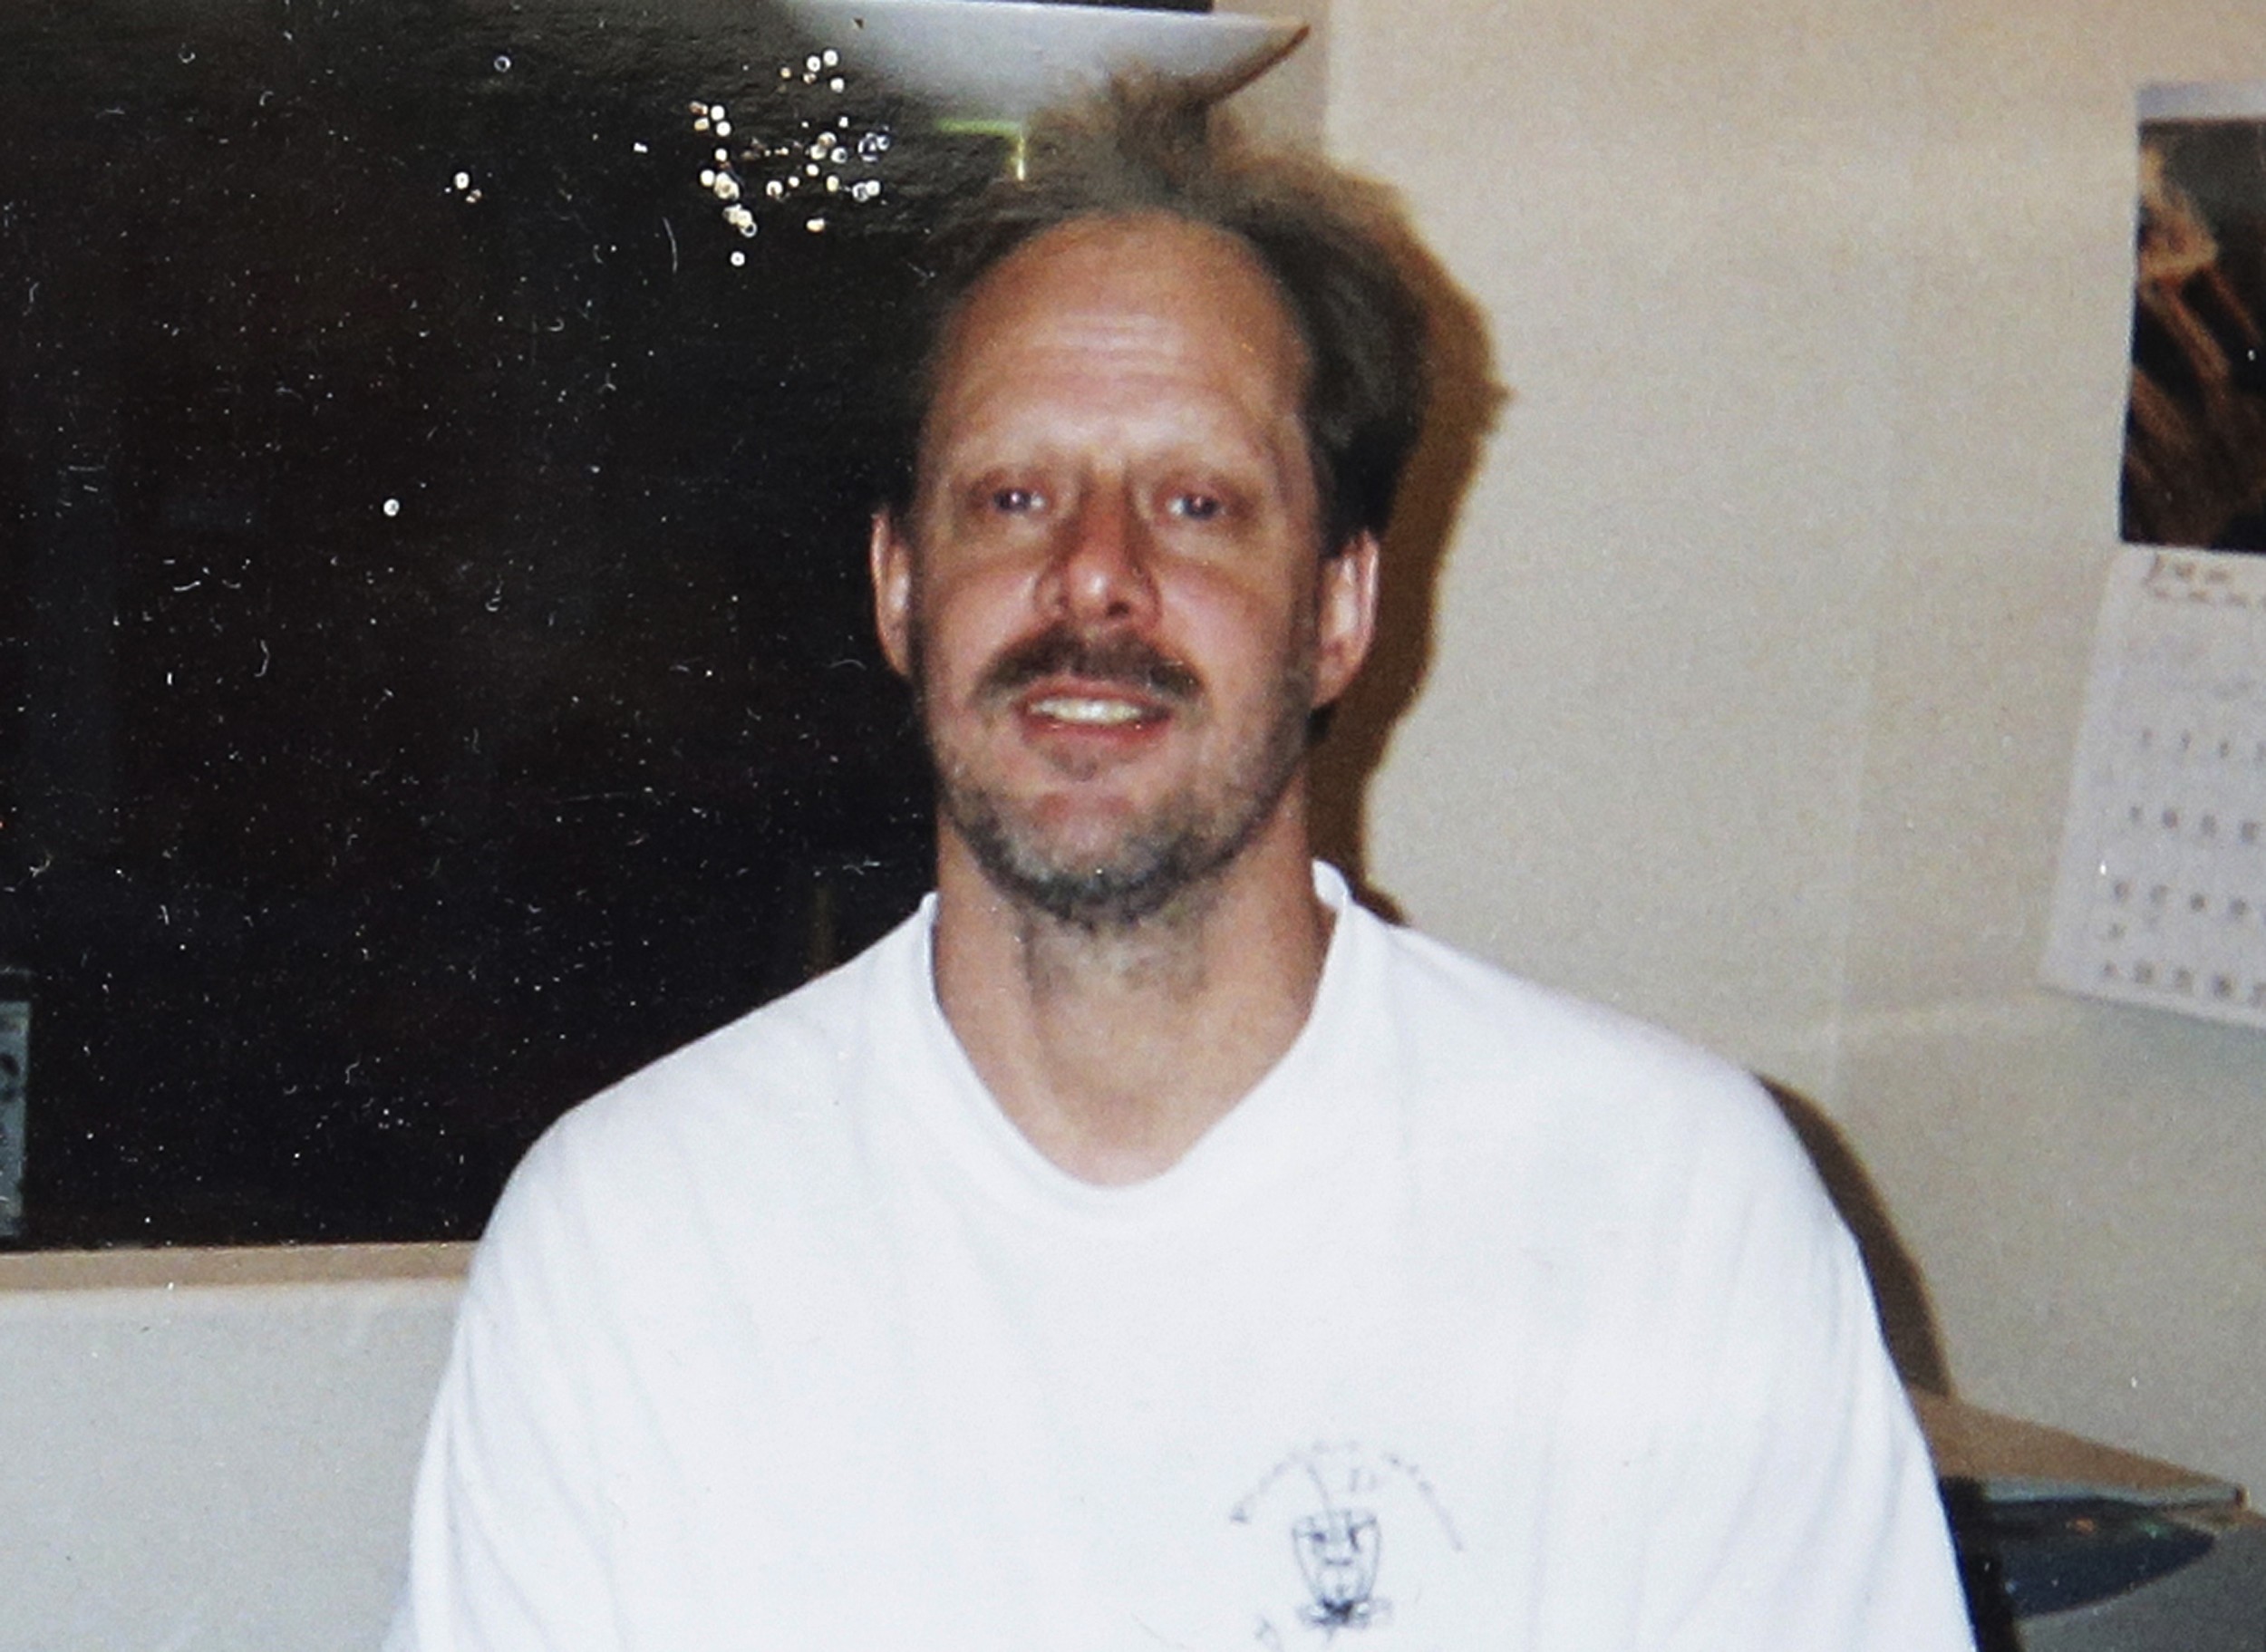 This undated photo provided by Eric Paddock shows his brother, Las Vegas gunman Stephen Paddock. Photo: AP